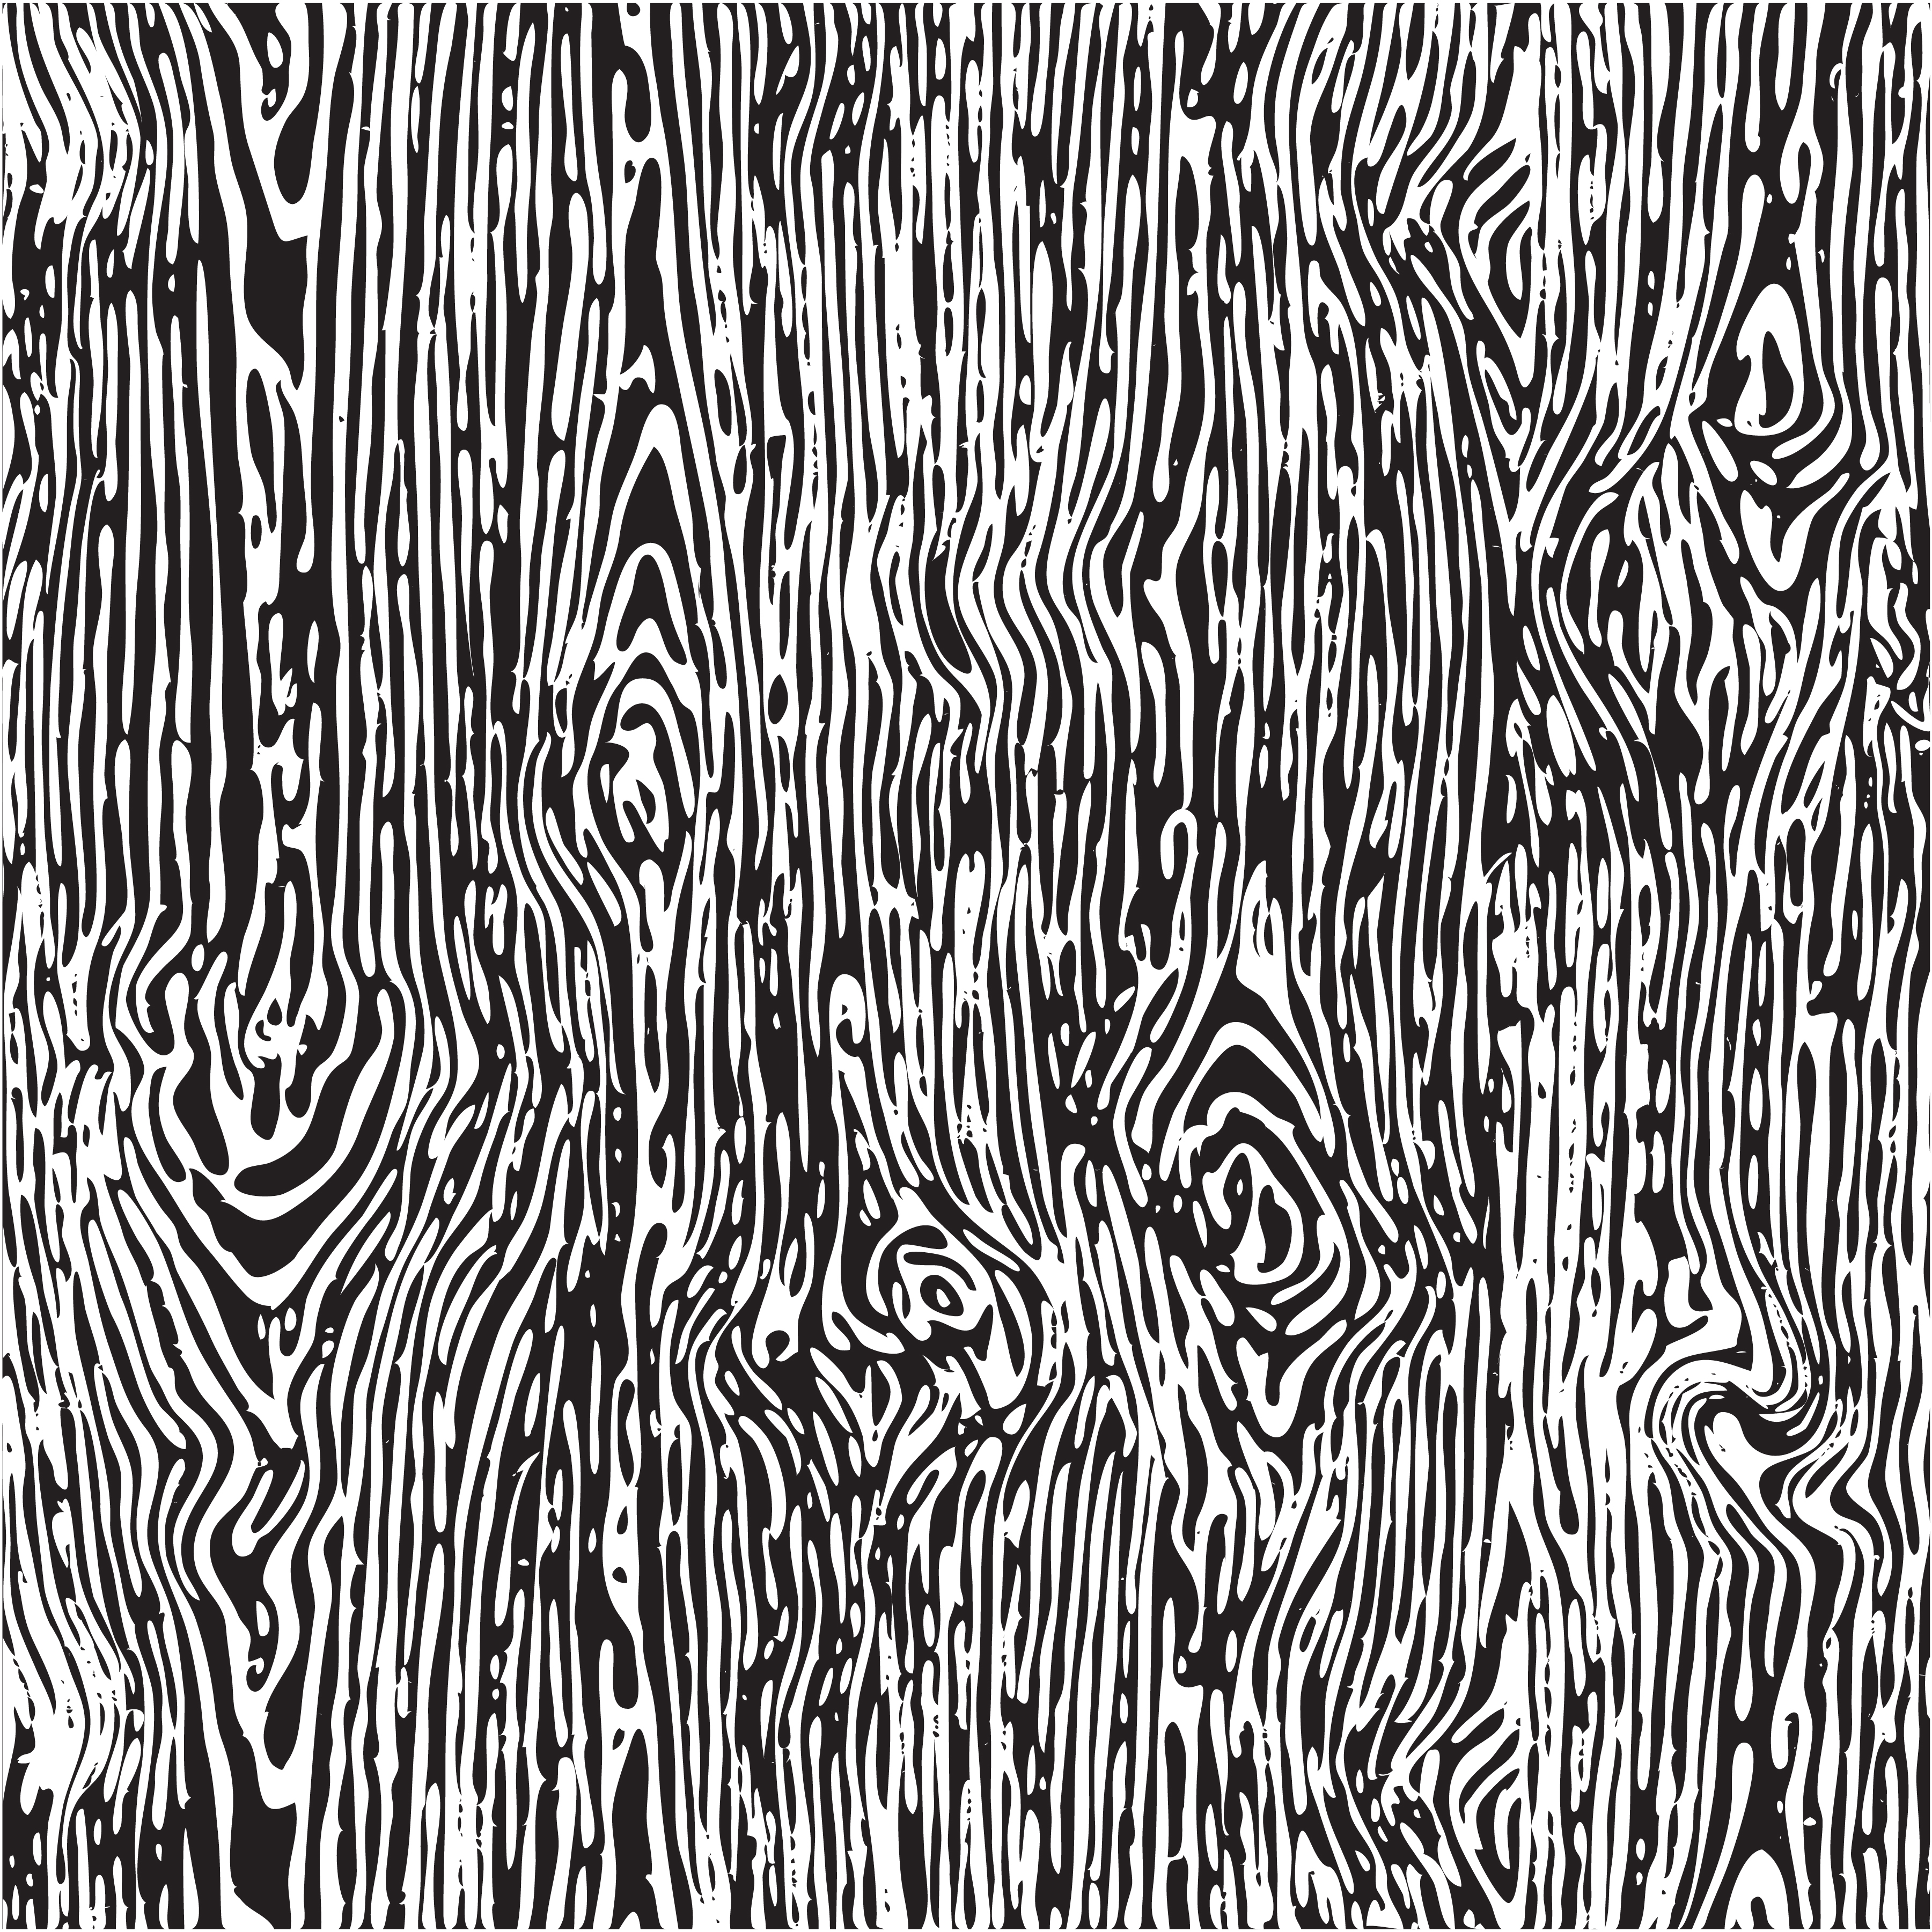 Black And White Woodgrain Texture Download Free Vectors Clipart